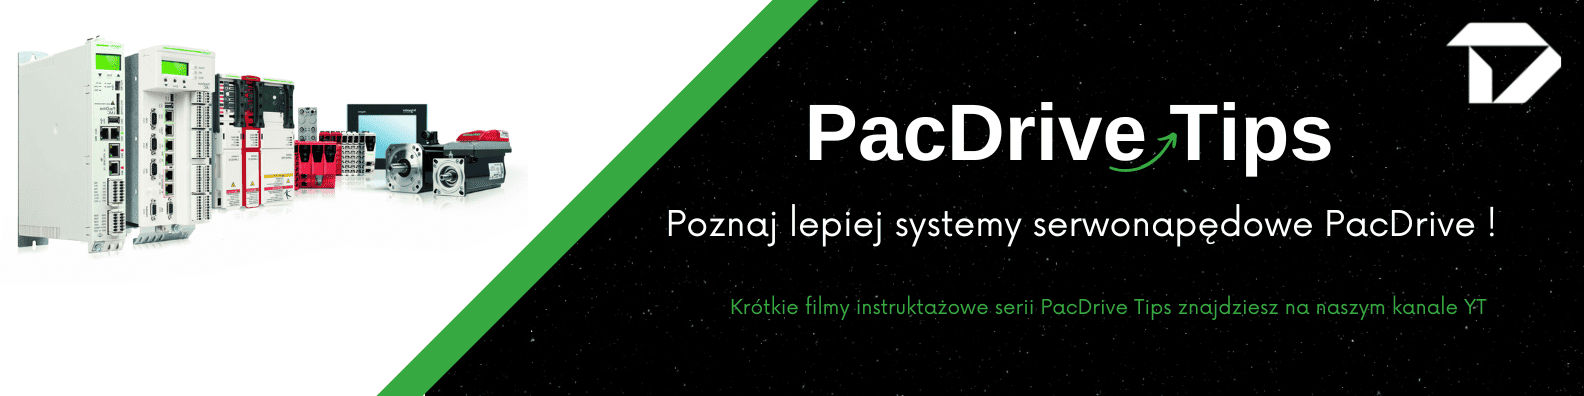 PacDrive Tips2